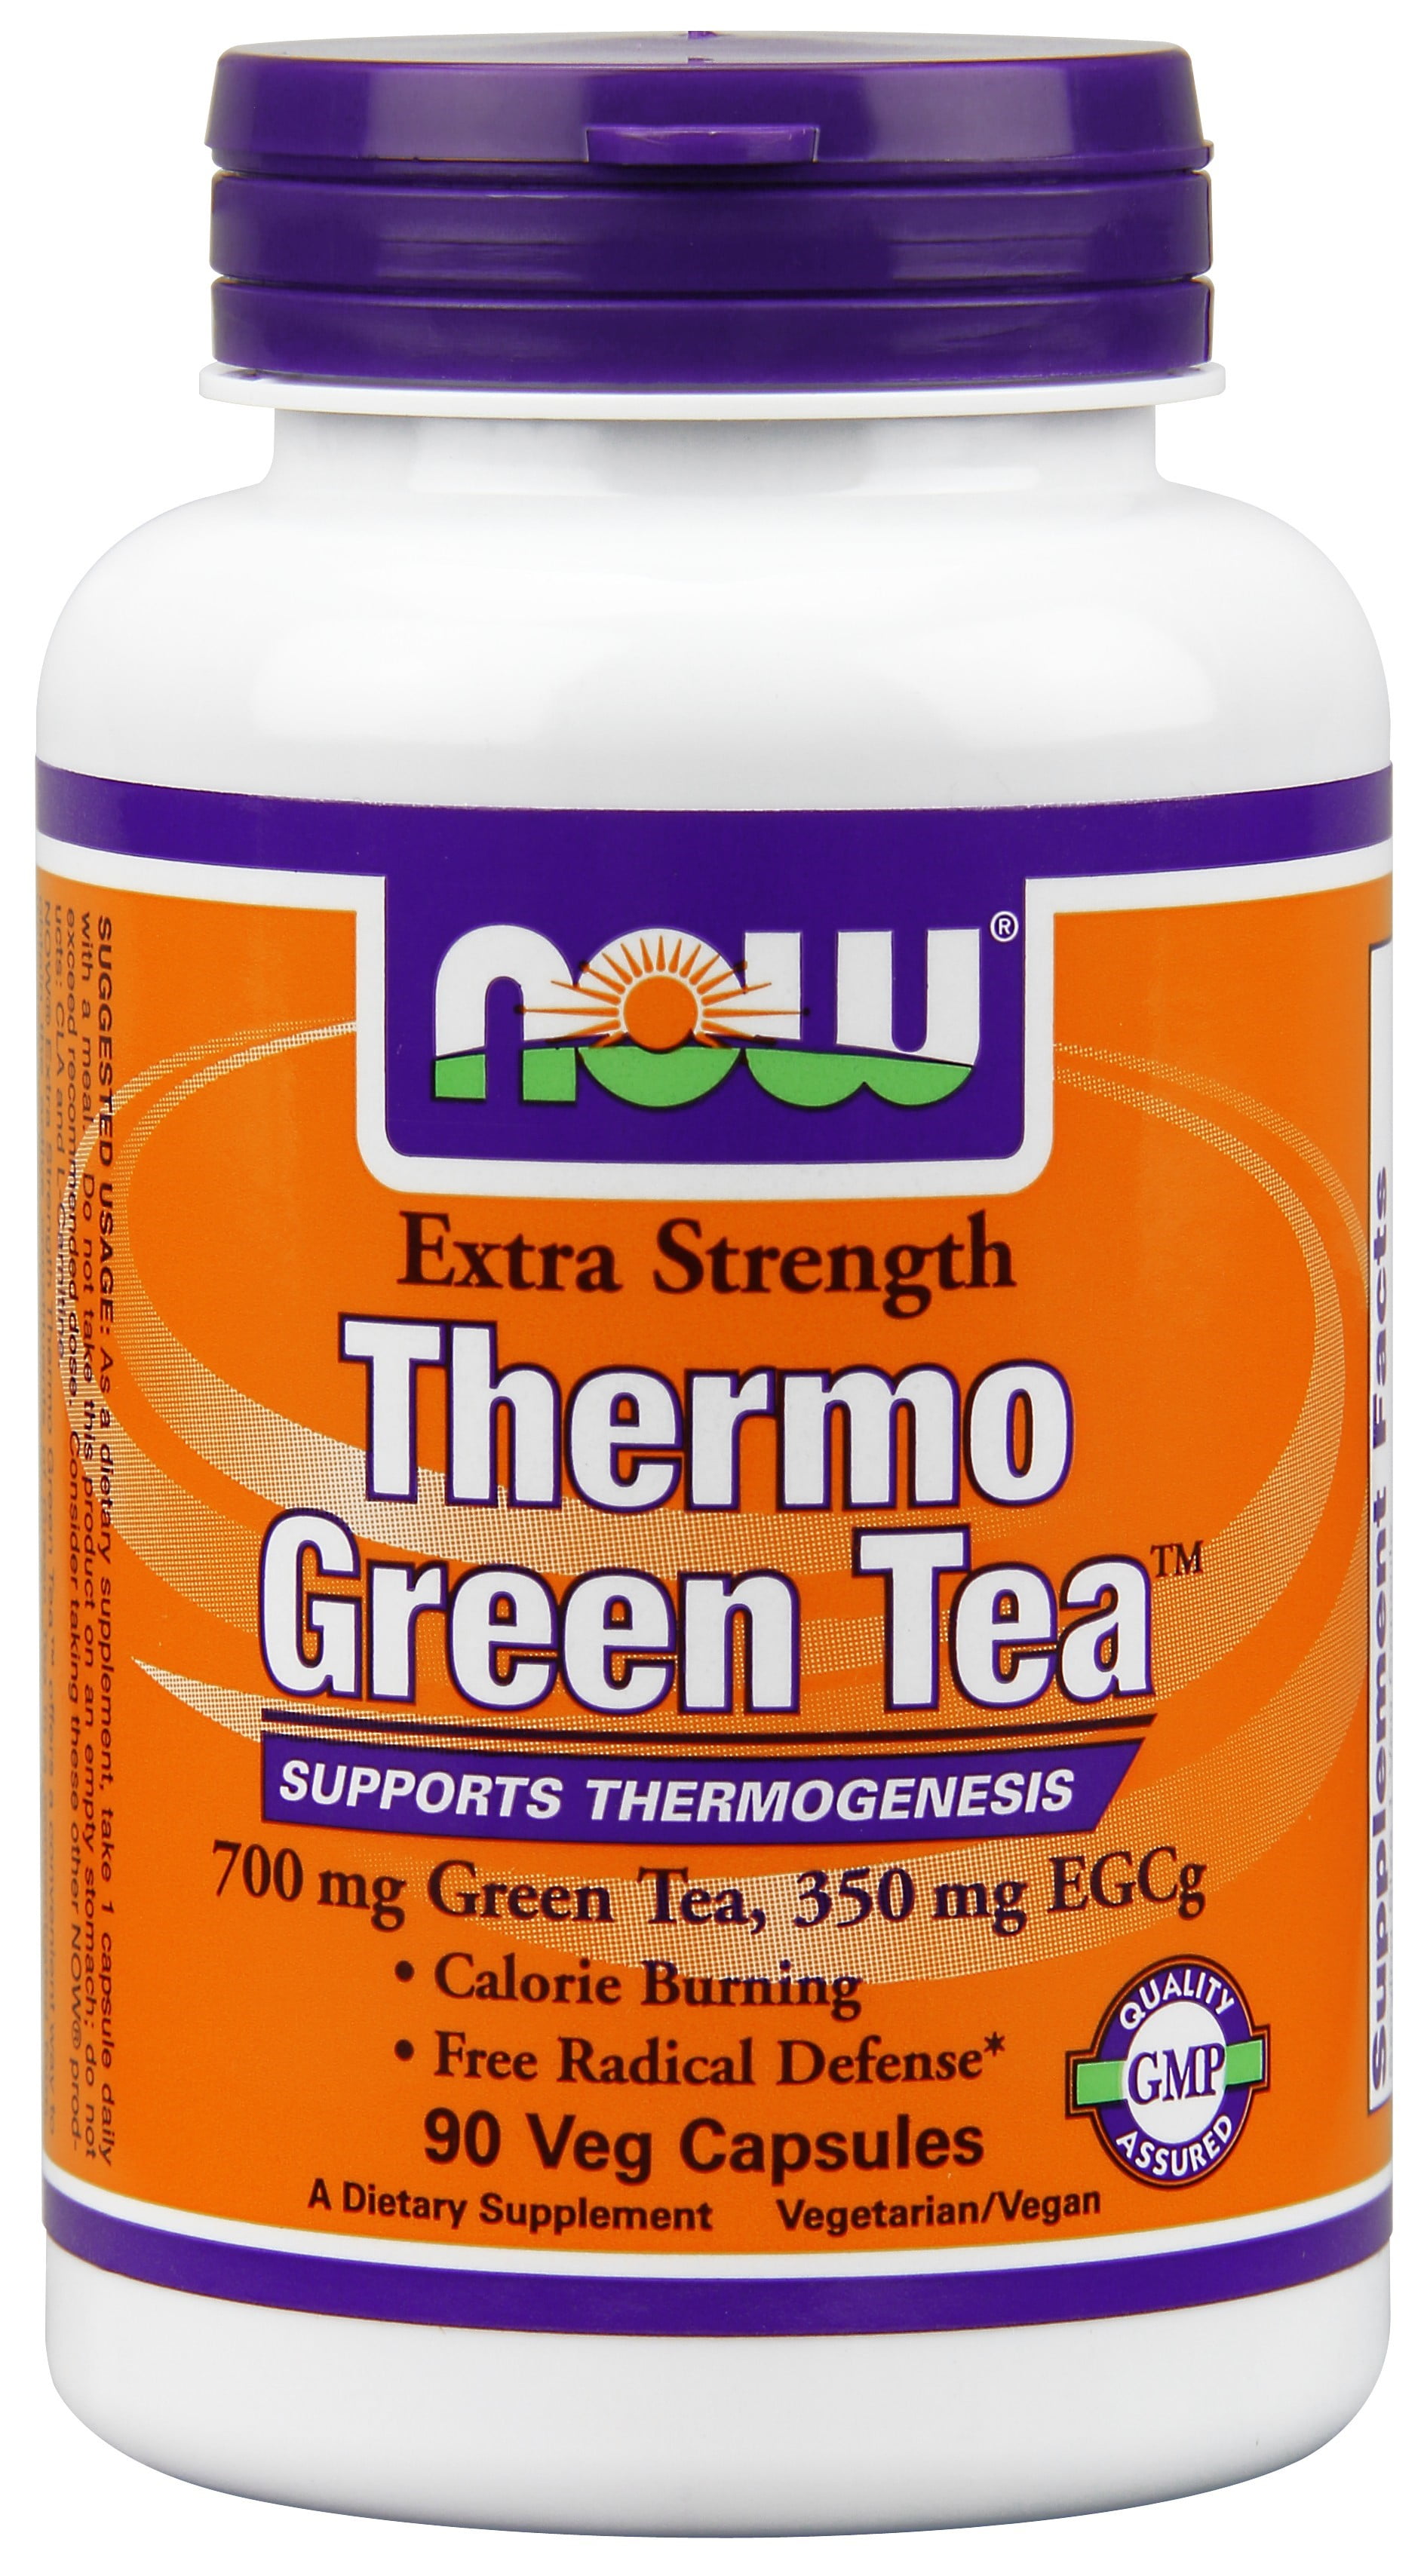 Now Supplements, Thermo Green Tea, Extra Strength, with 700 mg Green Tea and 350 mg EGCG, 90 Veg Capsules (Pack of 3)